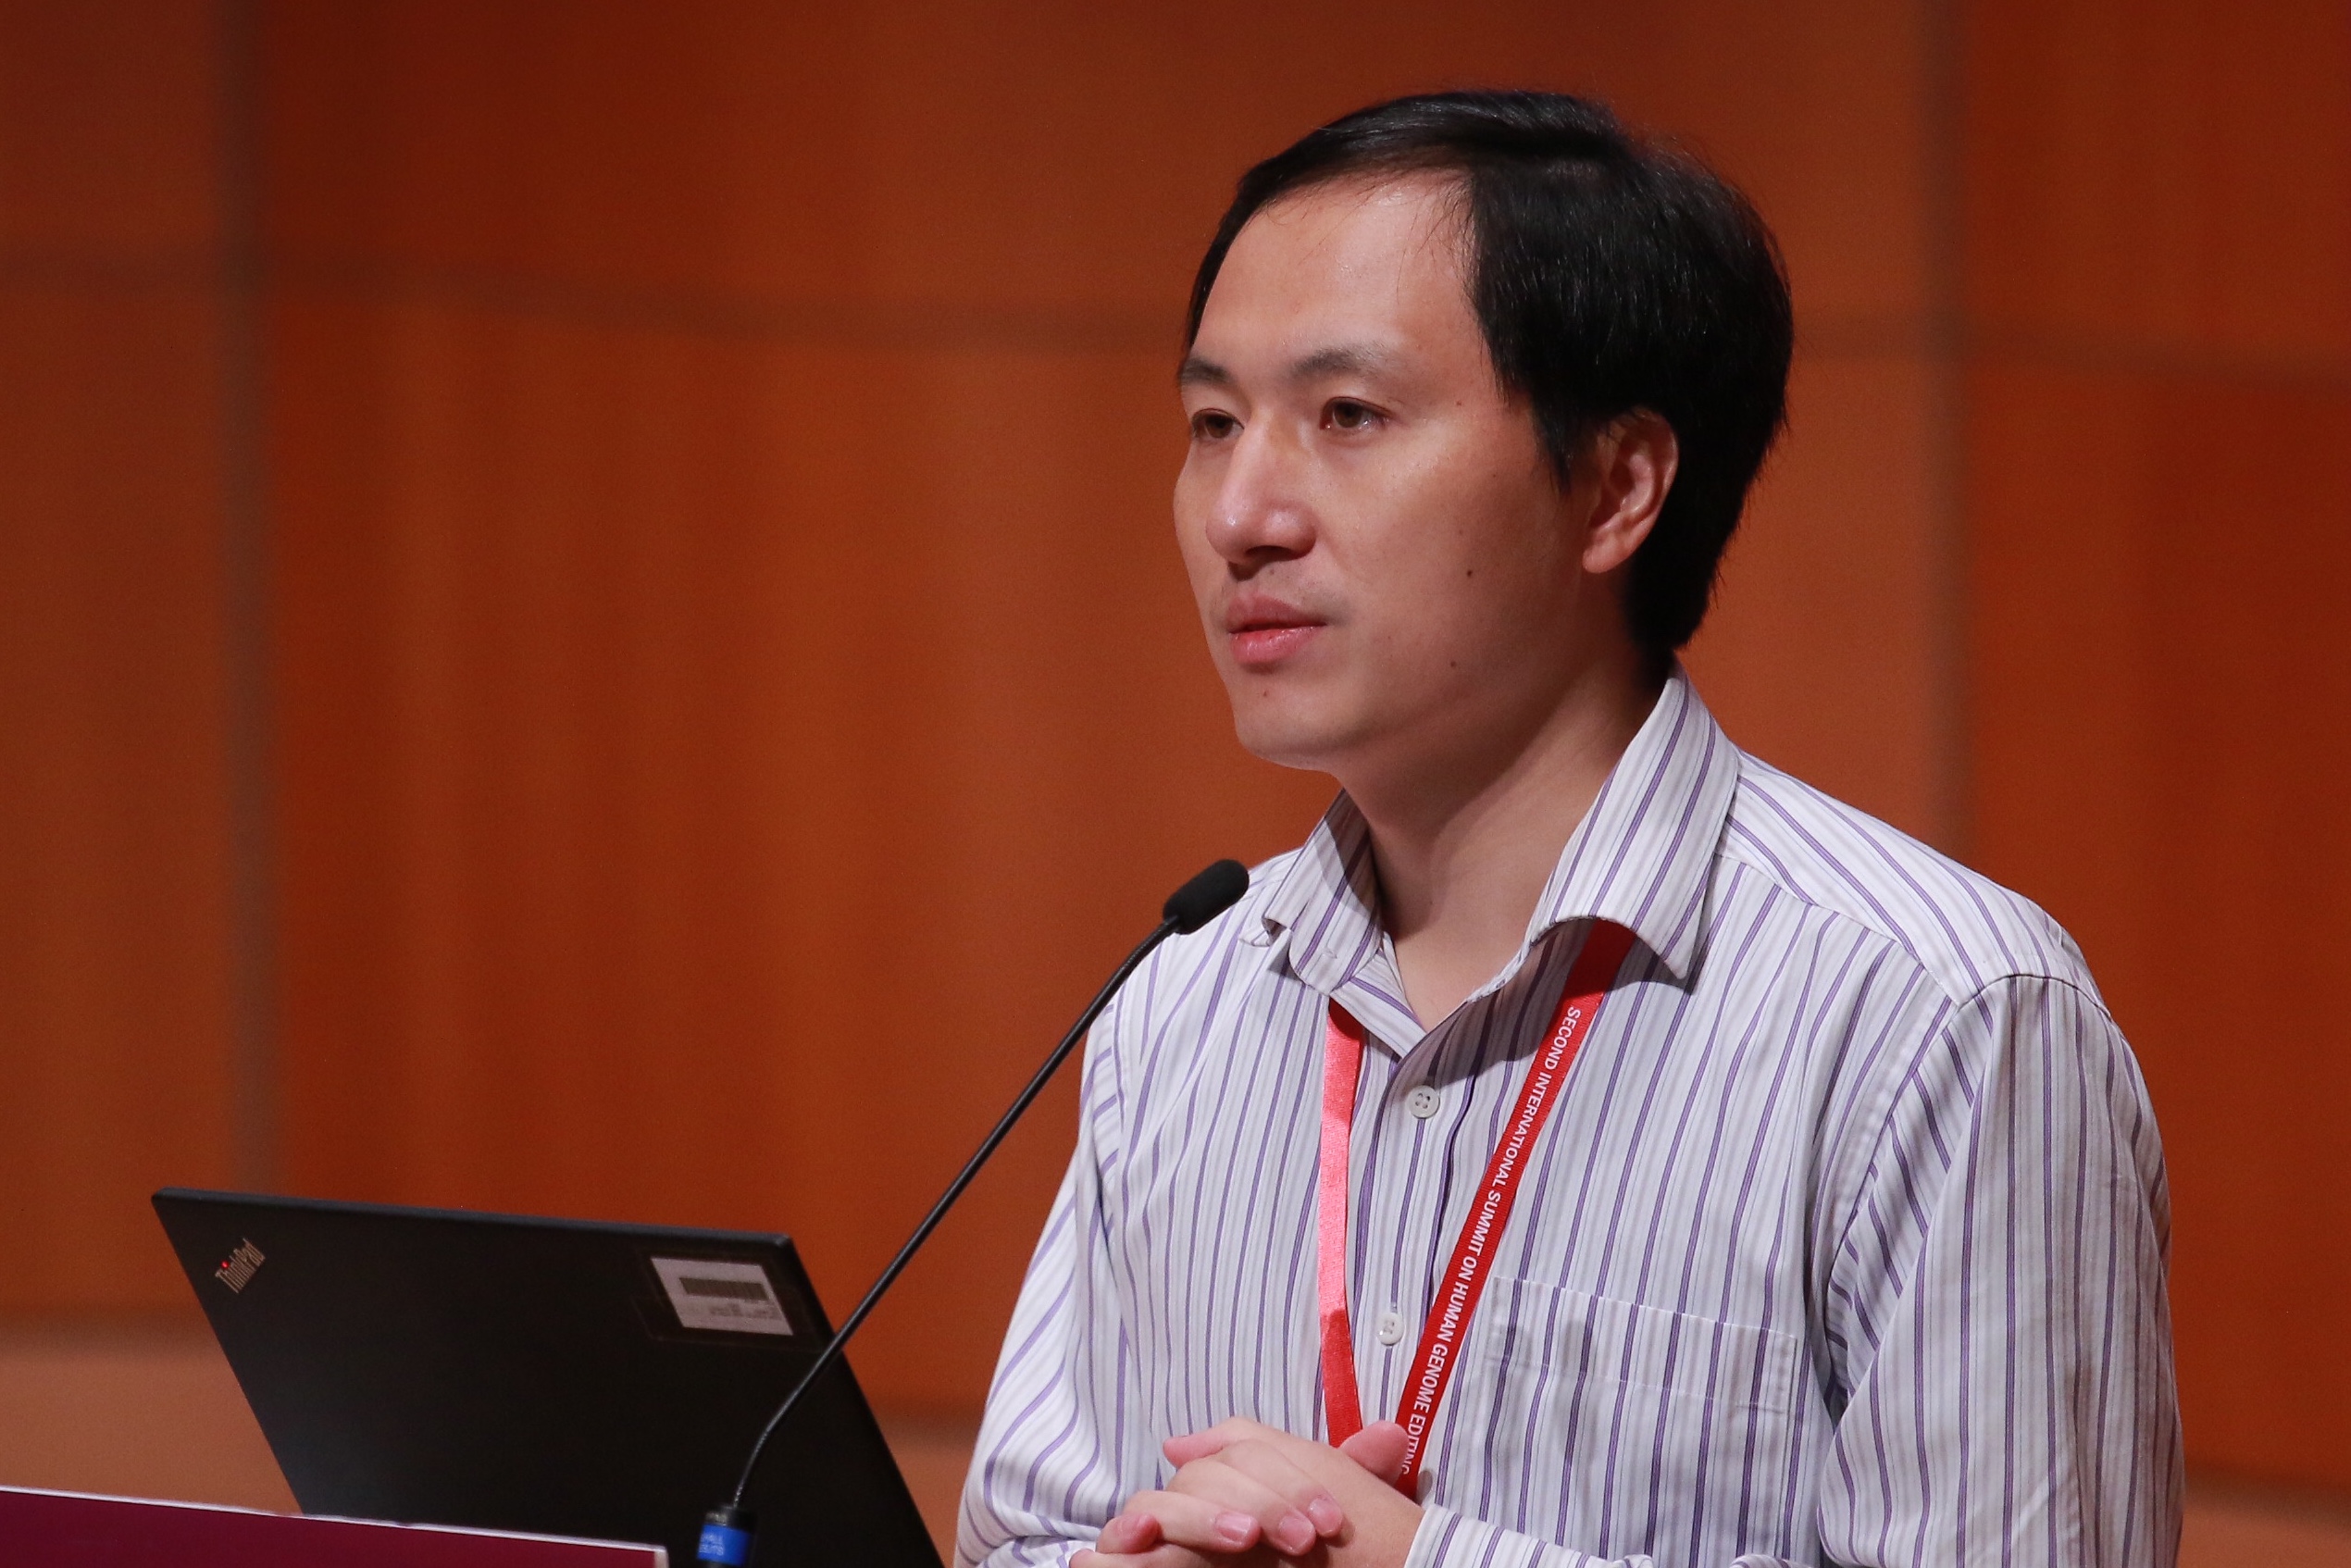 Biological researcher He Jiankui speaks on day two of the Second International Summit on Human Genome Editing at the University of Hong Kong (HKU) on November 28, 2018 in Hong Kong, China. (VCG—VCG via Getty Images)